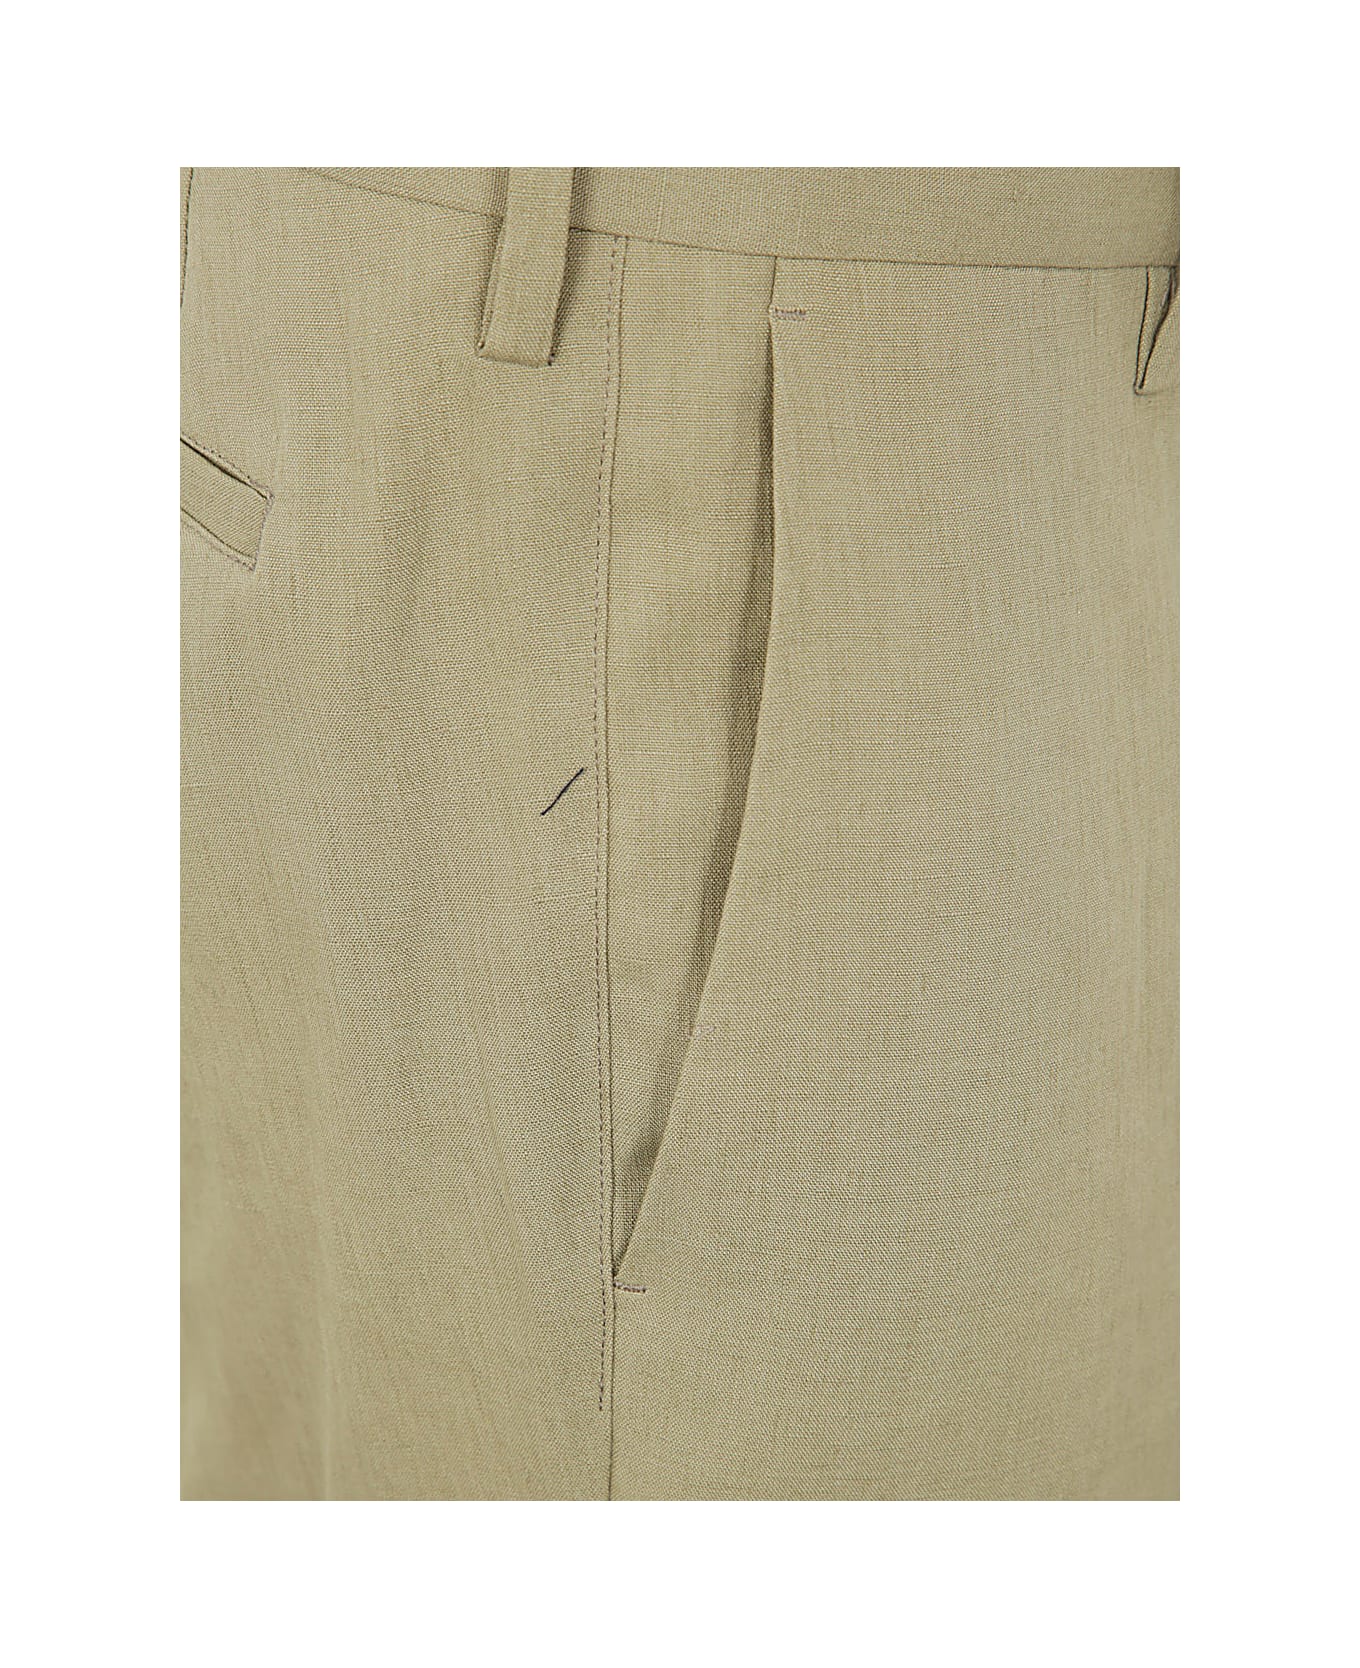 Paul Smith Mens Trouser - Browns ボトムス